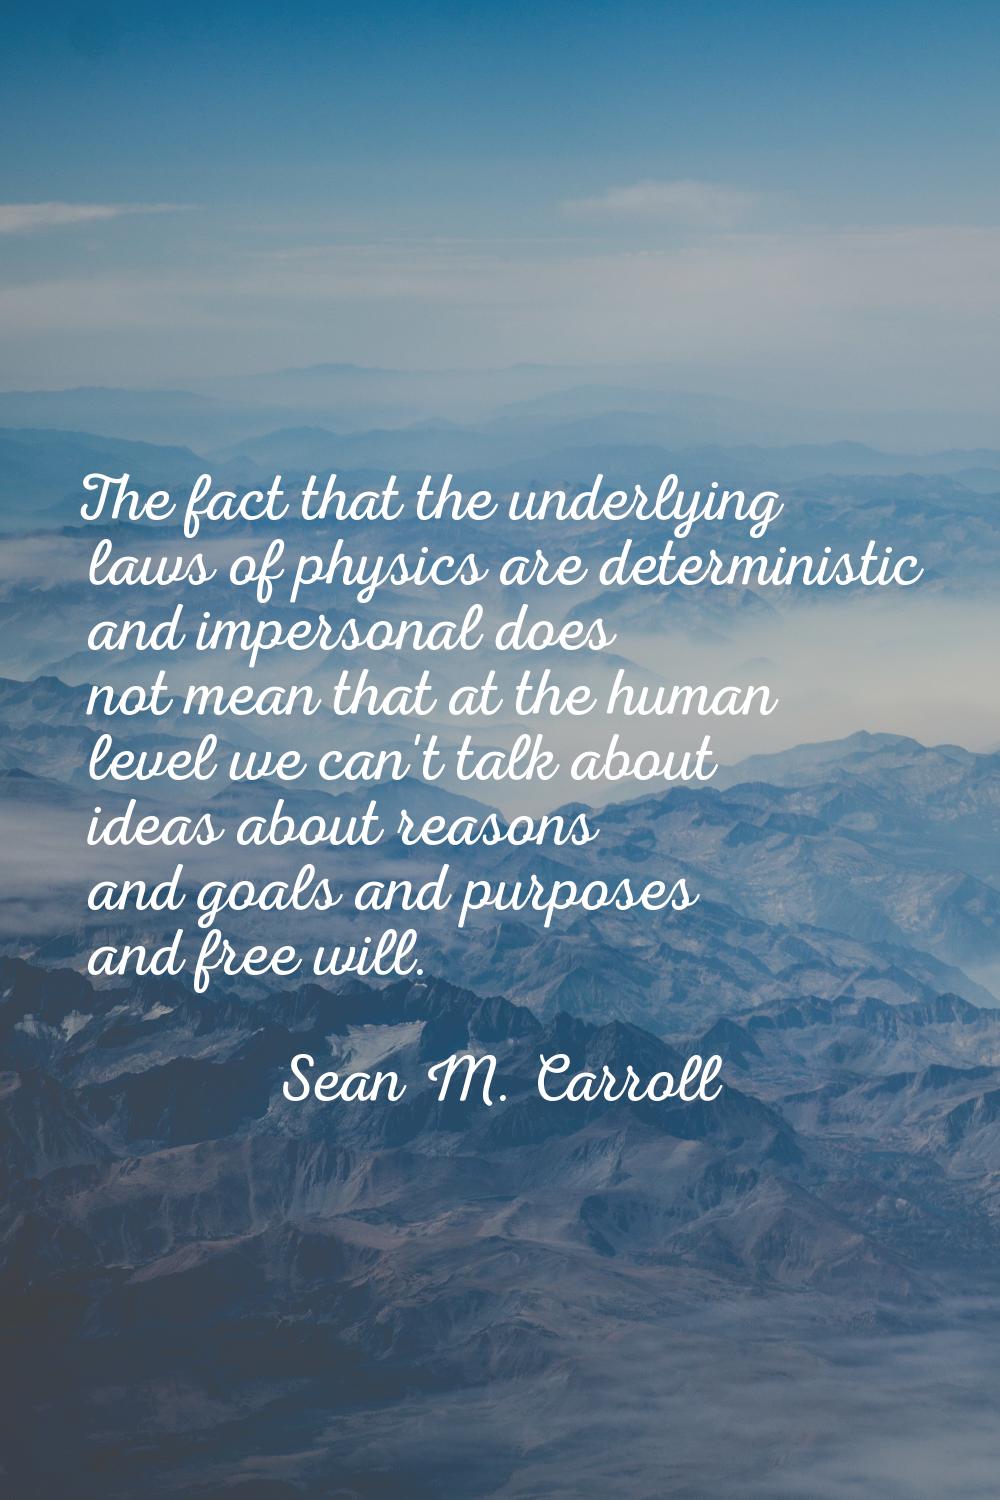 The fact that the underlying laws of physics are deterministic and impersonal does not mean that at